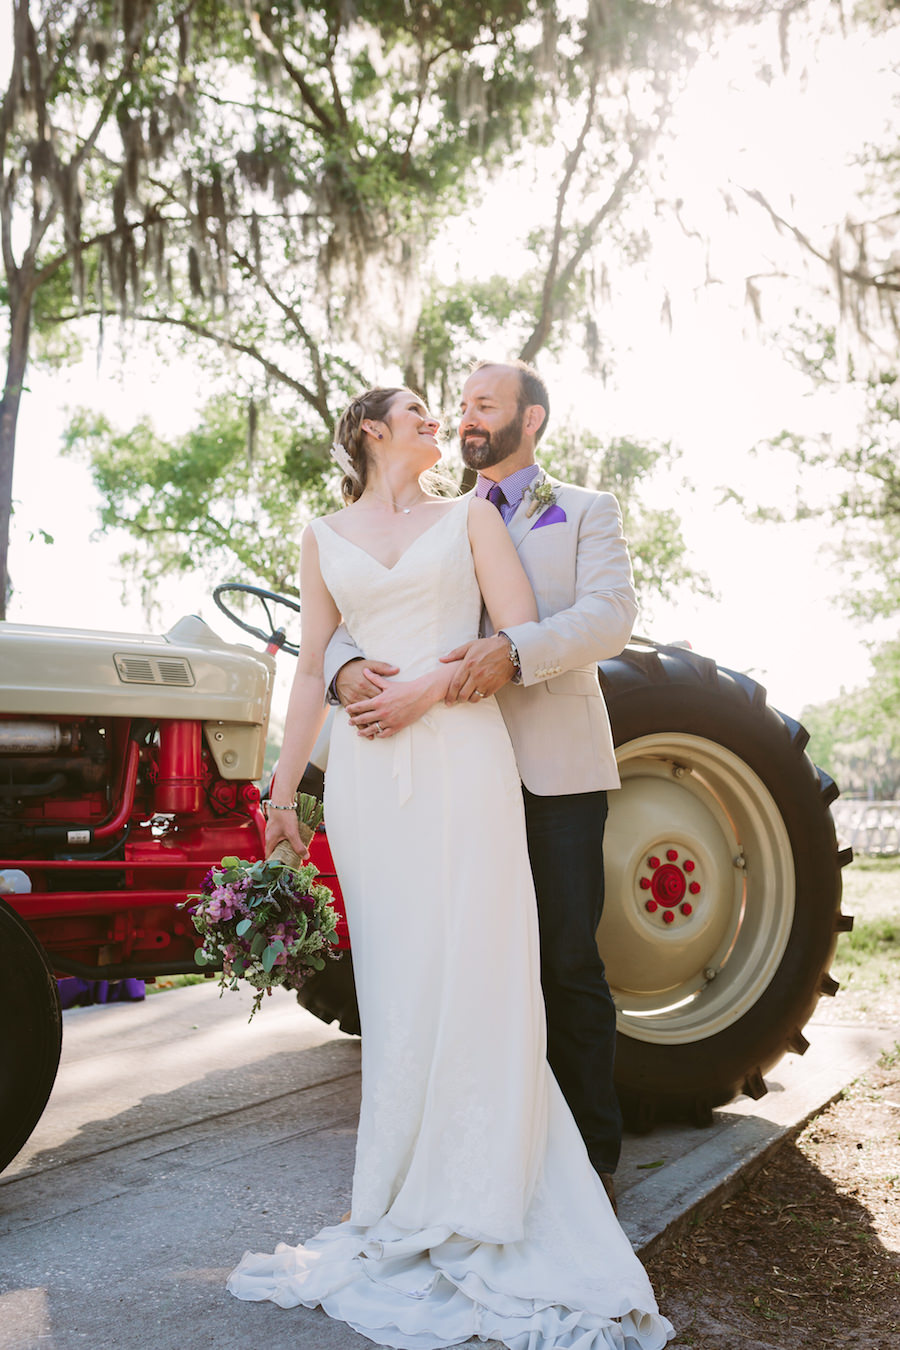 Outdoor, Rustic Bride and Groom Wedding Portrait with Red Tractor